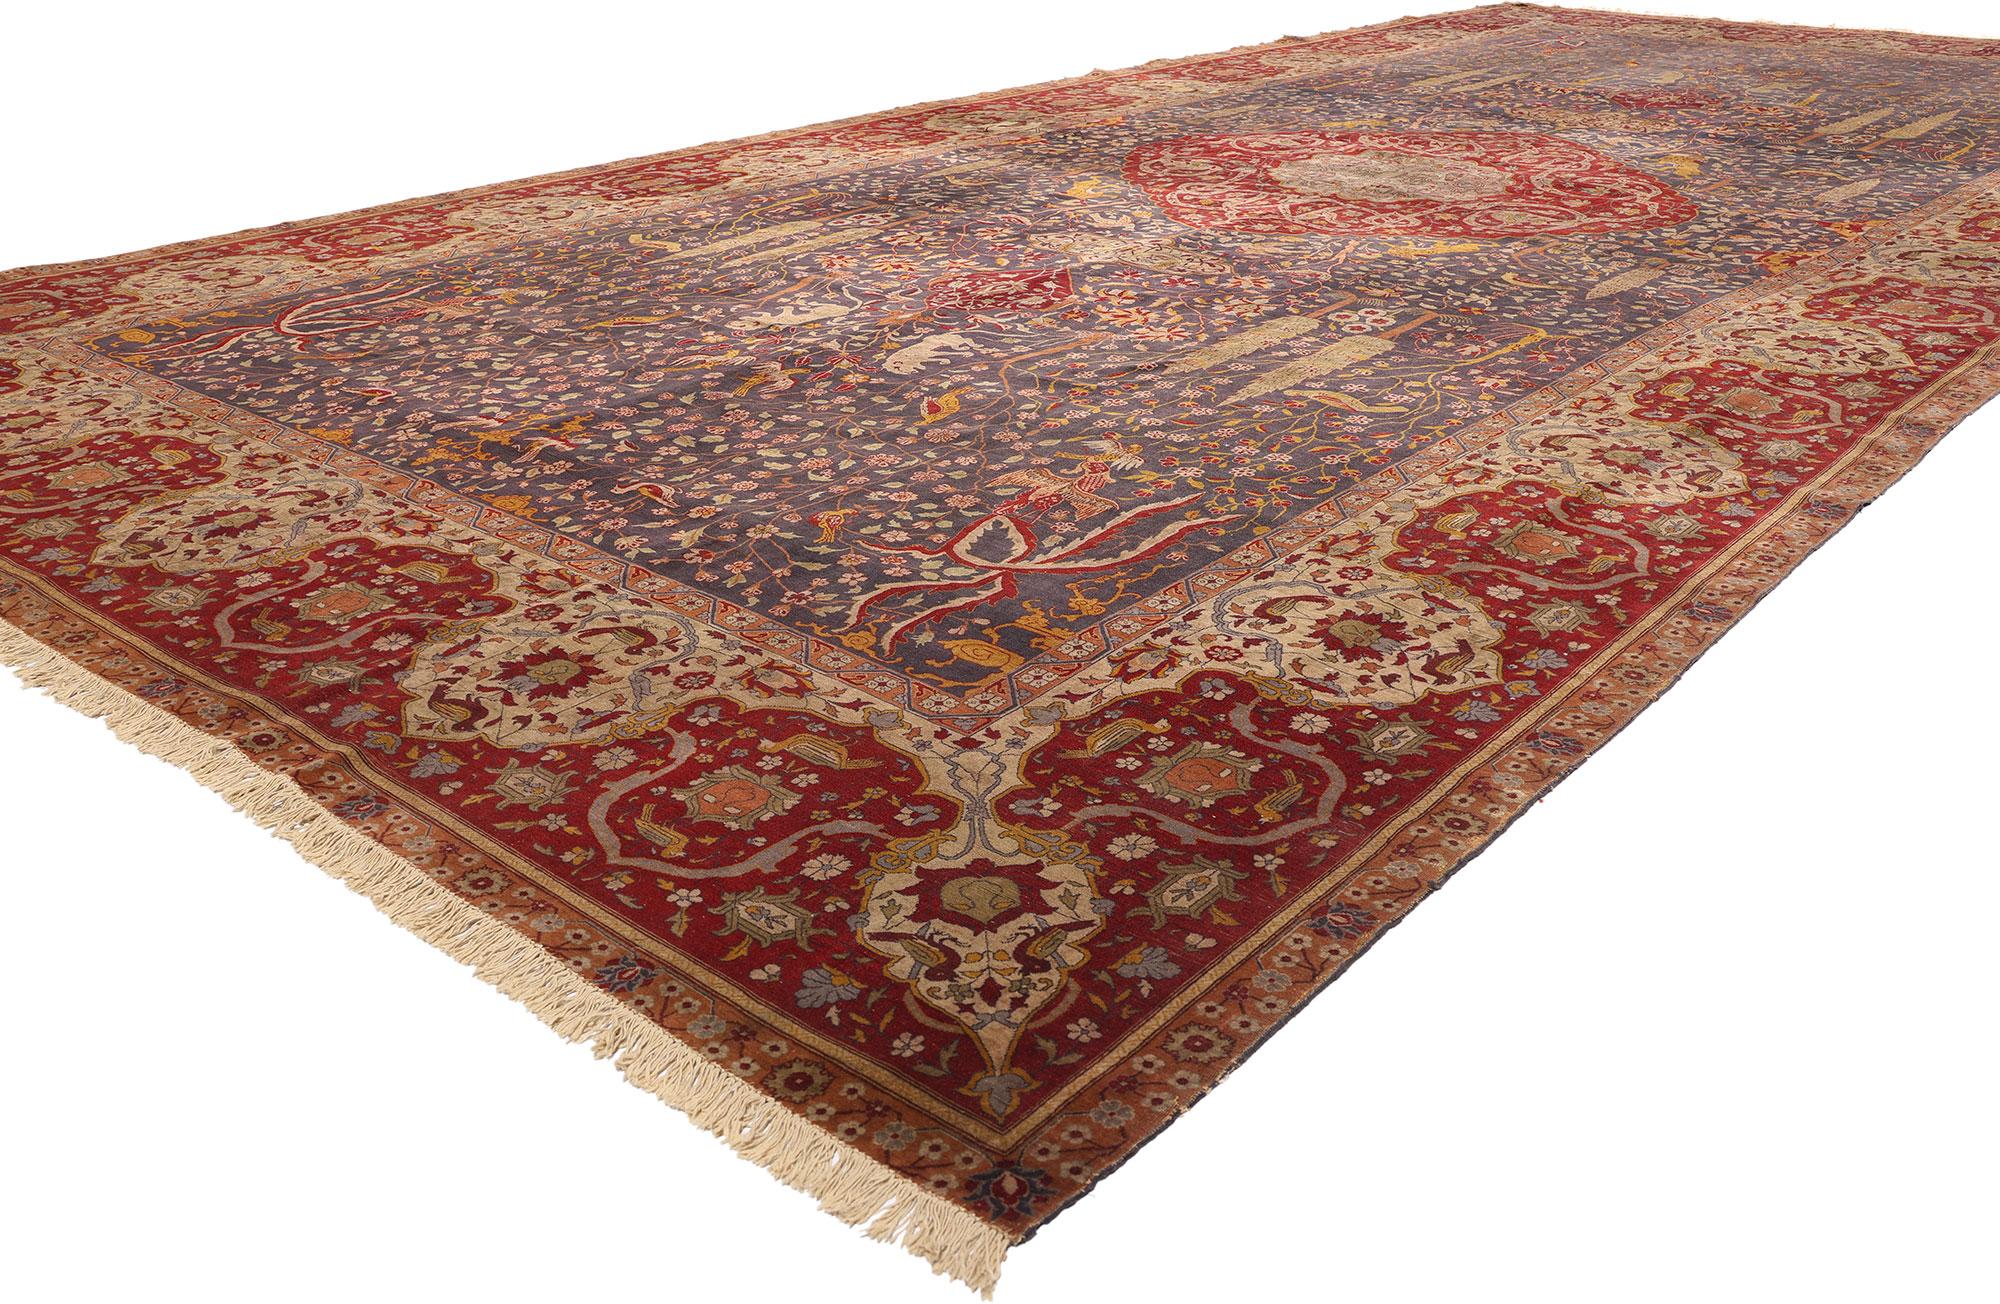 72779 Oversized Antique Persian Isfahan Rug, 10'01 X 20'06. This antique Persian Isfahan rug, meticulously hand-knotted from wool, showcases the renowned design of the Schwarzenberg Paradise Park carpet. The Schwarzenberg Paradise Park carpet, a